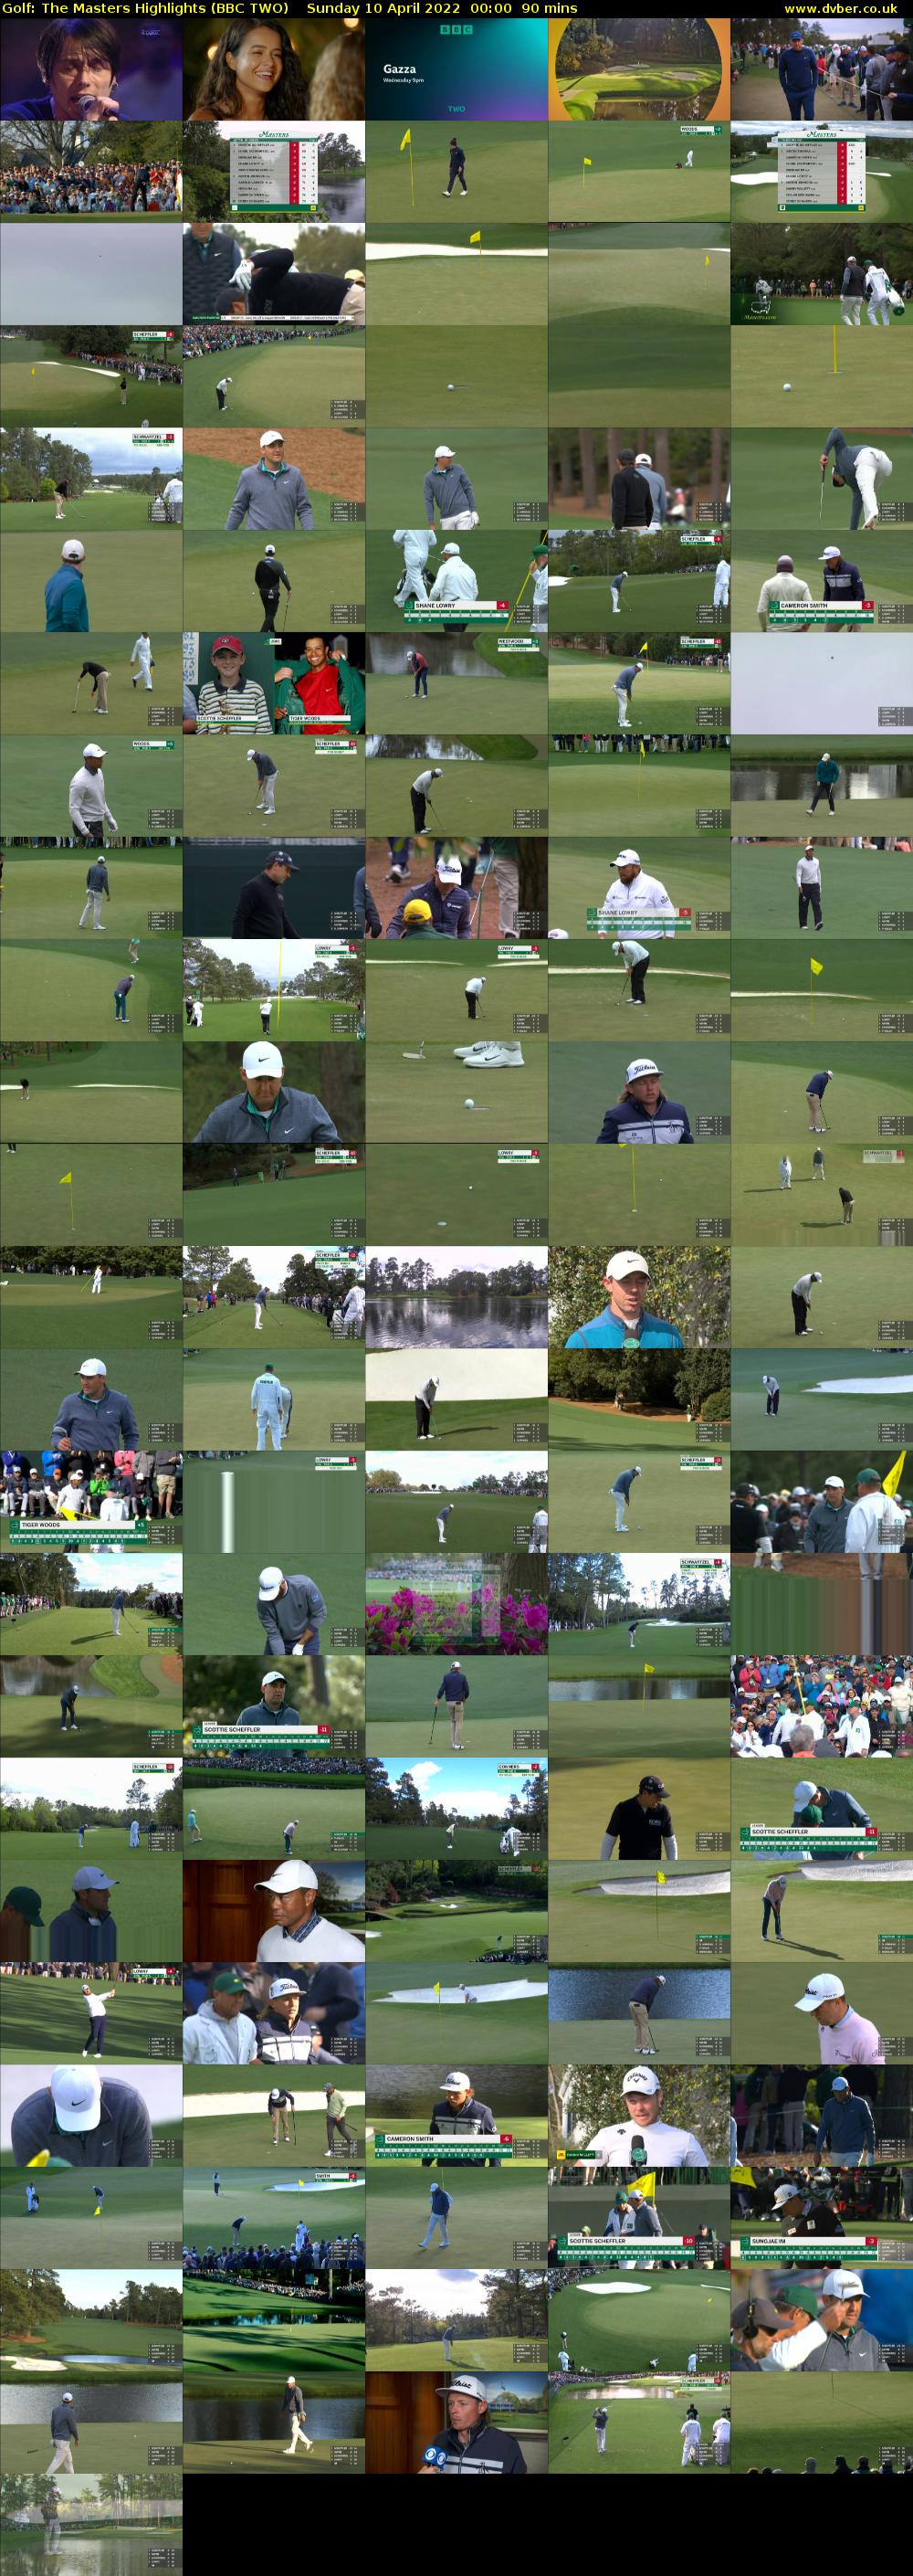 Golf: The Masters Highlights (BBC TWO) Sunday 10 April 2022 00:00 - 01:30